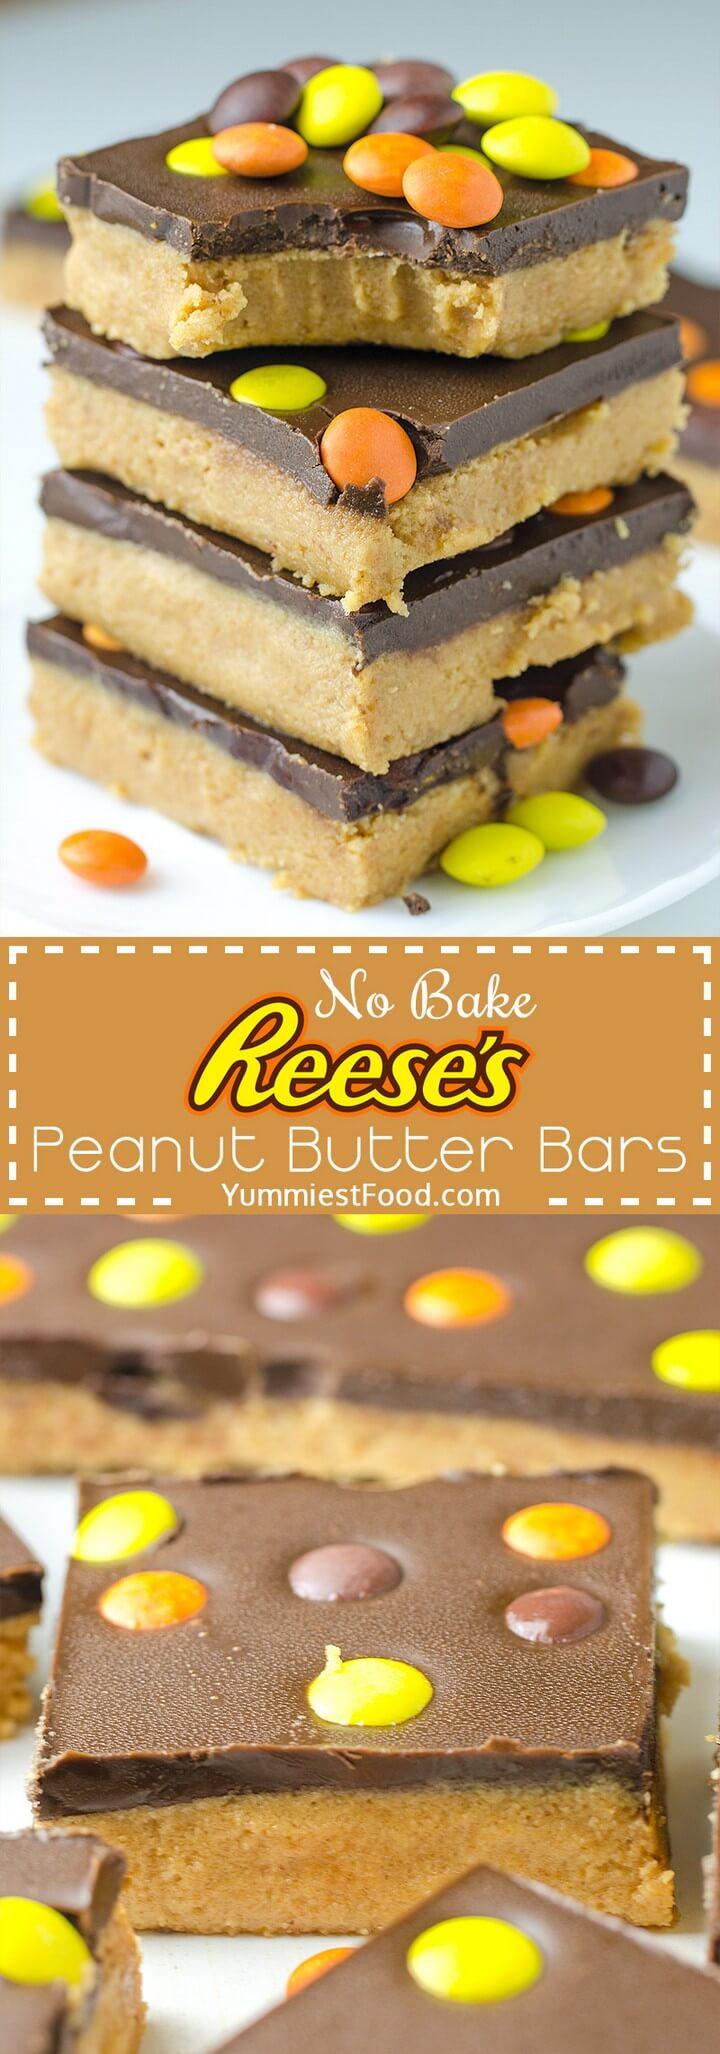 Easy No Bake Reese’s Peanut Butter Bars Recipe, easy no bake dessert recipes with few ingredients, fancy no bake desserts, elegant no bake desserts, no bake desserts for kids, gourmet no bake desserts, no bake desserts allrecipes, no bake dessert bars, chocolate no bake desserts, easy dessert recipes with pictures, best dessert recipes, dessert recipes for kids, easy dessert recipes with condensed milk, easy dessert recipes no baking, chocolate dessert recipes, easy dessert recipes with few ingredients, desserts list, no bake dessert recipes, no bake dessert recipes easy, easy no bake dessert recipes with few ingredients,, no bake strawberry dessert recipes easy no bake desserts allrecipes, cheap no bake dessert recipes, no bake dessert recipes for summer, no bake blueberry dessert recipes, no bake lemon dessert recipes, best no bake dessert recipes, no bake dessert recipes with cream cheese, no bake cheesecake dessert recipes, easy no bake diabetic dessert recipes, no bake mason jar dessert recipes, no bake dessert recipes for business, gluten free no bake dessert recipes, no bake 4th of july dessert recipes, easy no bake dessert recipes for a crowd, no bake dessert recipes for a crowd, no bake strawberry dessert recipes easy uk, 3 ingredient no bake dessert recipes, no bake apple dessert recipes, non baking dessert recipes easy, reese's no bake dessert bars recipe, low carb no bake dessert recipes, no bake dessert recipes with few ingredients, no bake dessert bars recipes, no bake dessert recipes food network, low calorie no bake dessert recipes, easy no bake dessert recipes with few ingredients filipino, easy no bake lemon dessert recipes, no bake holiday dessert recipes, no bake coconut dessert recipes, no bake desserts recipes south africa, no bake dessert recipes for thanksgiving, no bake italian dessert recipes, no bake dessert recipes for christmas, no bake berry dessert recipes, no bake dessert recipes with condensed milk, no bake easter dessert recipes, no bake mini dessert recipes, no bake halloween dessert recipes, low fat no bake dessert recipes, no bake banana dessert recipes, 35 no bake dessert recipes, easy no bake mini dessert recipes, no bake dessert recipes for diabetics, no bake hot dessert recipes, no bake dessert recipes uk, no bake dessert lasagna recipe, no bake dessert recipes pdf, no bake mint dessert recipes, no bake dessert recipes easy at home, no bake dessert recipes with peanut butter, 5 ingredient no bake dessert recipes, no bake layered dessert recipes, no bake cherry dessert recipes, no bake lime dessert recipes, 28 healthy easy no bake dessert recipes, easy no bake dessert recipes for beginners, no bake dessert recipes with cream, light no bake dessert recipes, easy no bake mexican dessert recipes, no bake dessert recipes indian, no bake banana split dessert incredible recipes,, homemade no bake dessert recipes no bake dessert recipes easy quick, no bake dessert recipes for a group, delicious no bake dessert recipes, easy delicious no bake dessert recipes, no bake dessert jar recipes, easy no bake dessert recipes few ingredients, easy no bake dessert recipes with few ingredients philippines, 50 no bake dessert recipes, looking for no bake dessert recipes, individual no bake dessert recipes, no bake dessert recipes for adults, no bake mascarpone dessert recipes, no bake healthy strawberry dessert recipes easy, no bake dessert recipes healthy, easy no bake dessert bar recipes, no bake dessert recipes tasty, no bake dessert recipes allrecipes, no bake dessert recipes for valentine's day, no bake easy dessert recipes with condensed milk, no bake mango dessert recipes, jello no bake dessert recipes, jello oreo no bake dessert recipes, no bake graham cracker dessert recipes, easy healthy no bake dessert recipes, taste of home no bake dessert recipes, no bake dairy free dessert recipes, great dessert recipes no bake, no bake chocolate dessert recipes easy, no bake fourth of july dessert recipes, easy to make no bake dessert recipes, no bake dessert recipes chocolate, no bake dessert recipes christmas, good dessert recipes no bake, diytomake.com